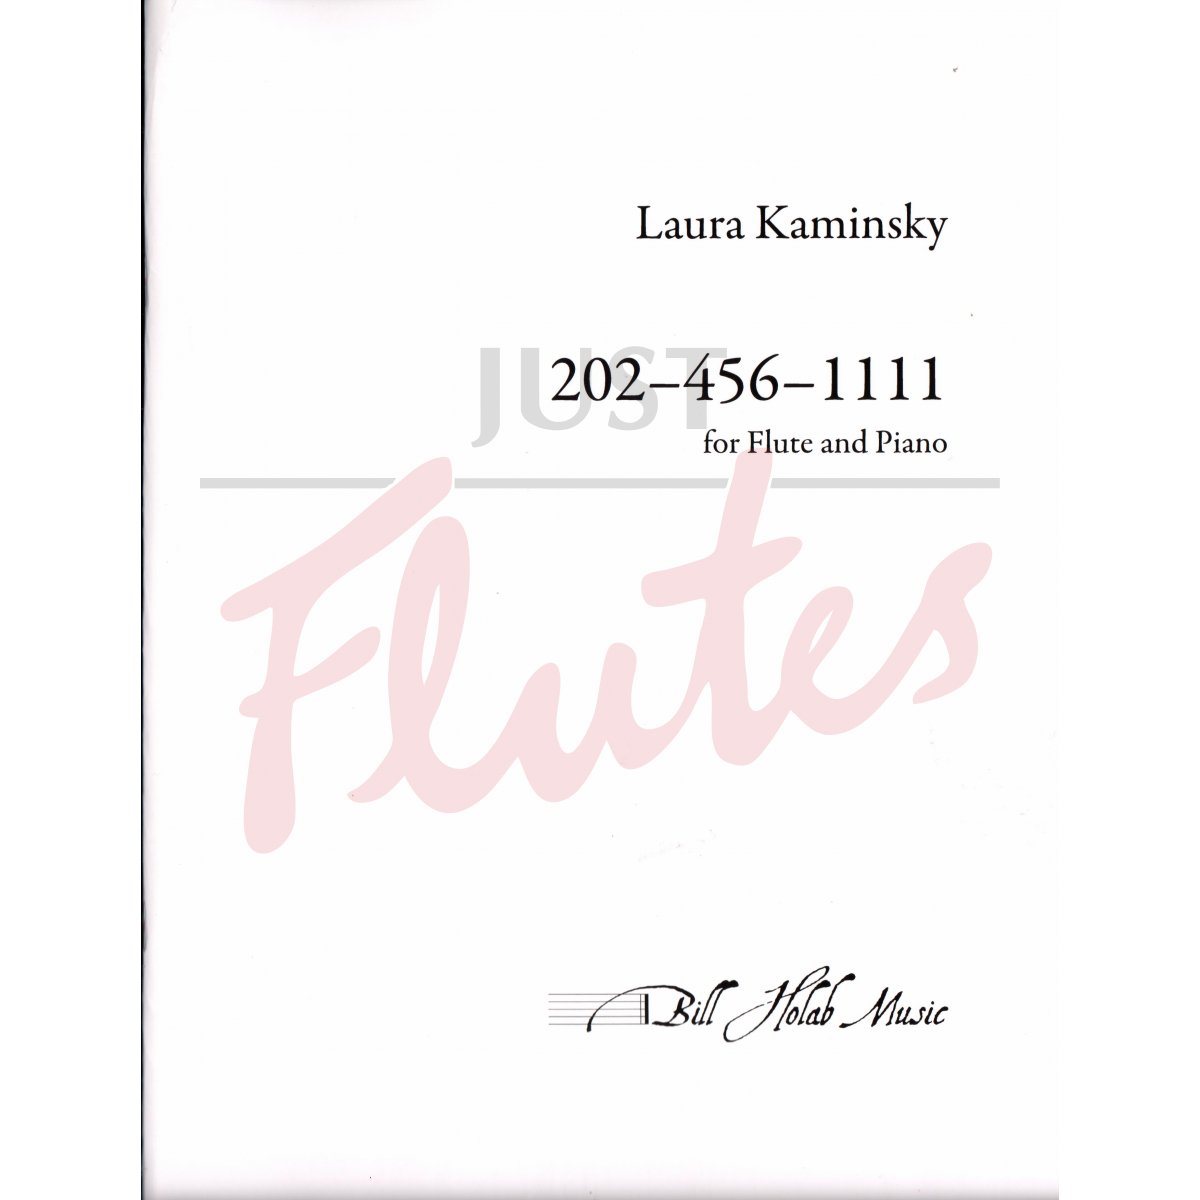 202-456-1111 for Flute and Piano